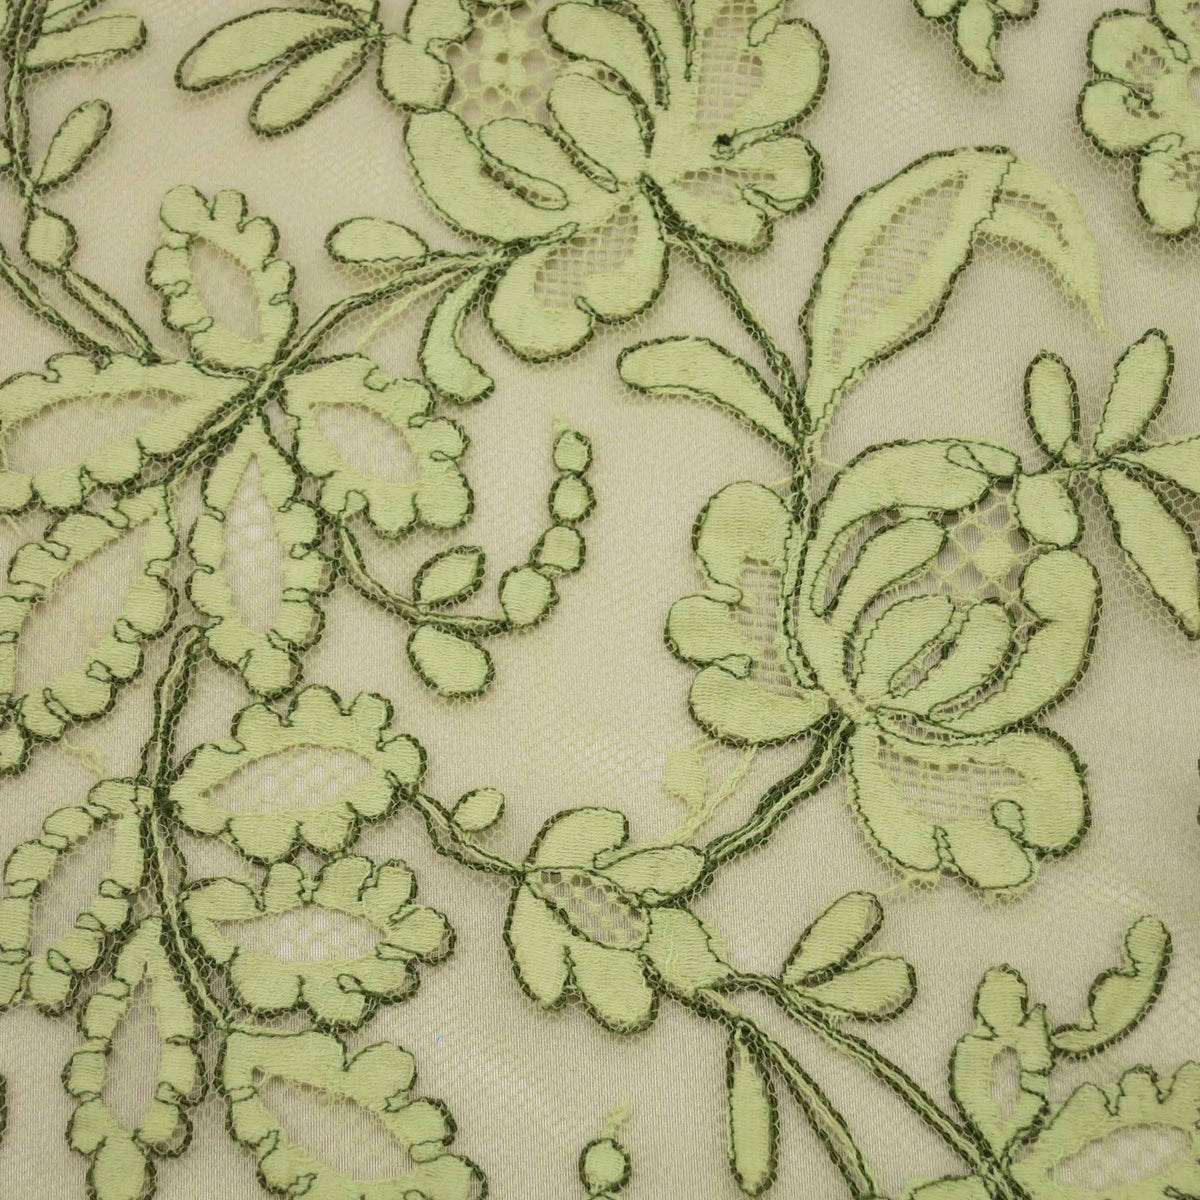 Corded Lace Fabric - Yellow - Embroidered Flower Design Lace Fabric So